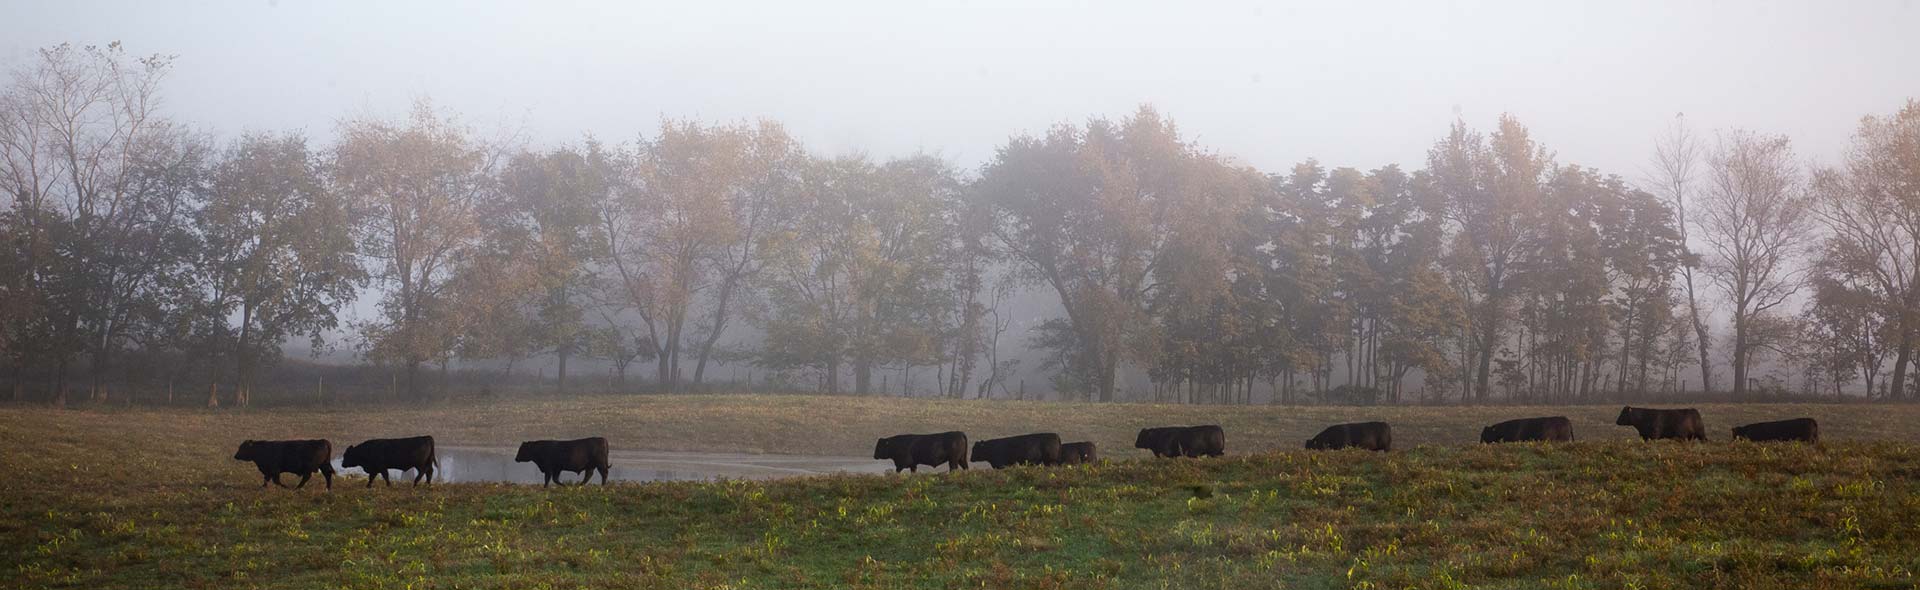 Cows walking in a line by a pond in the fall with fog